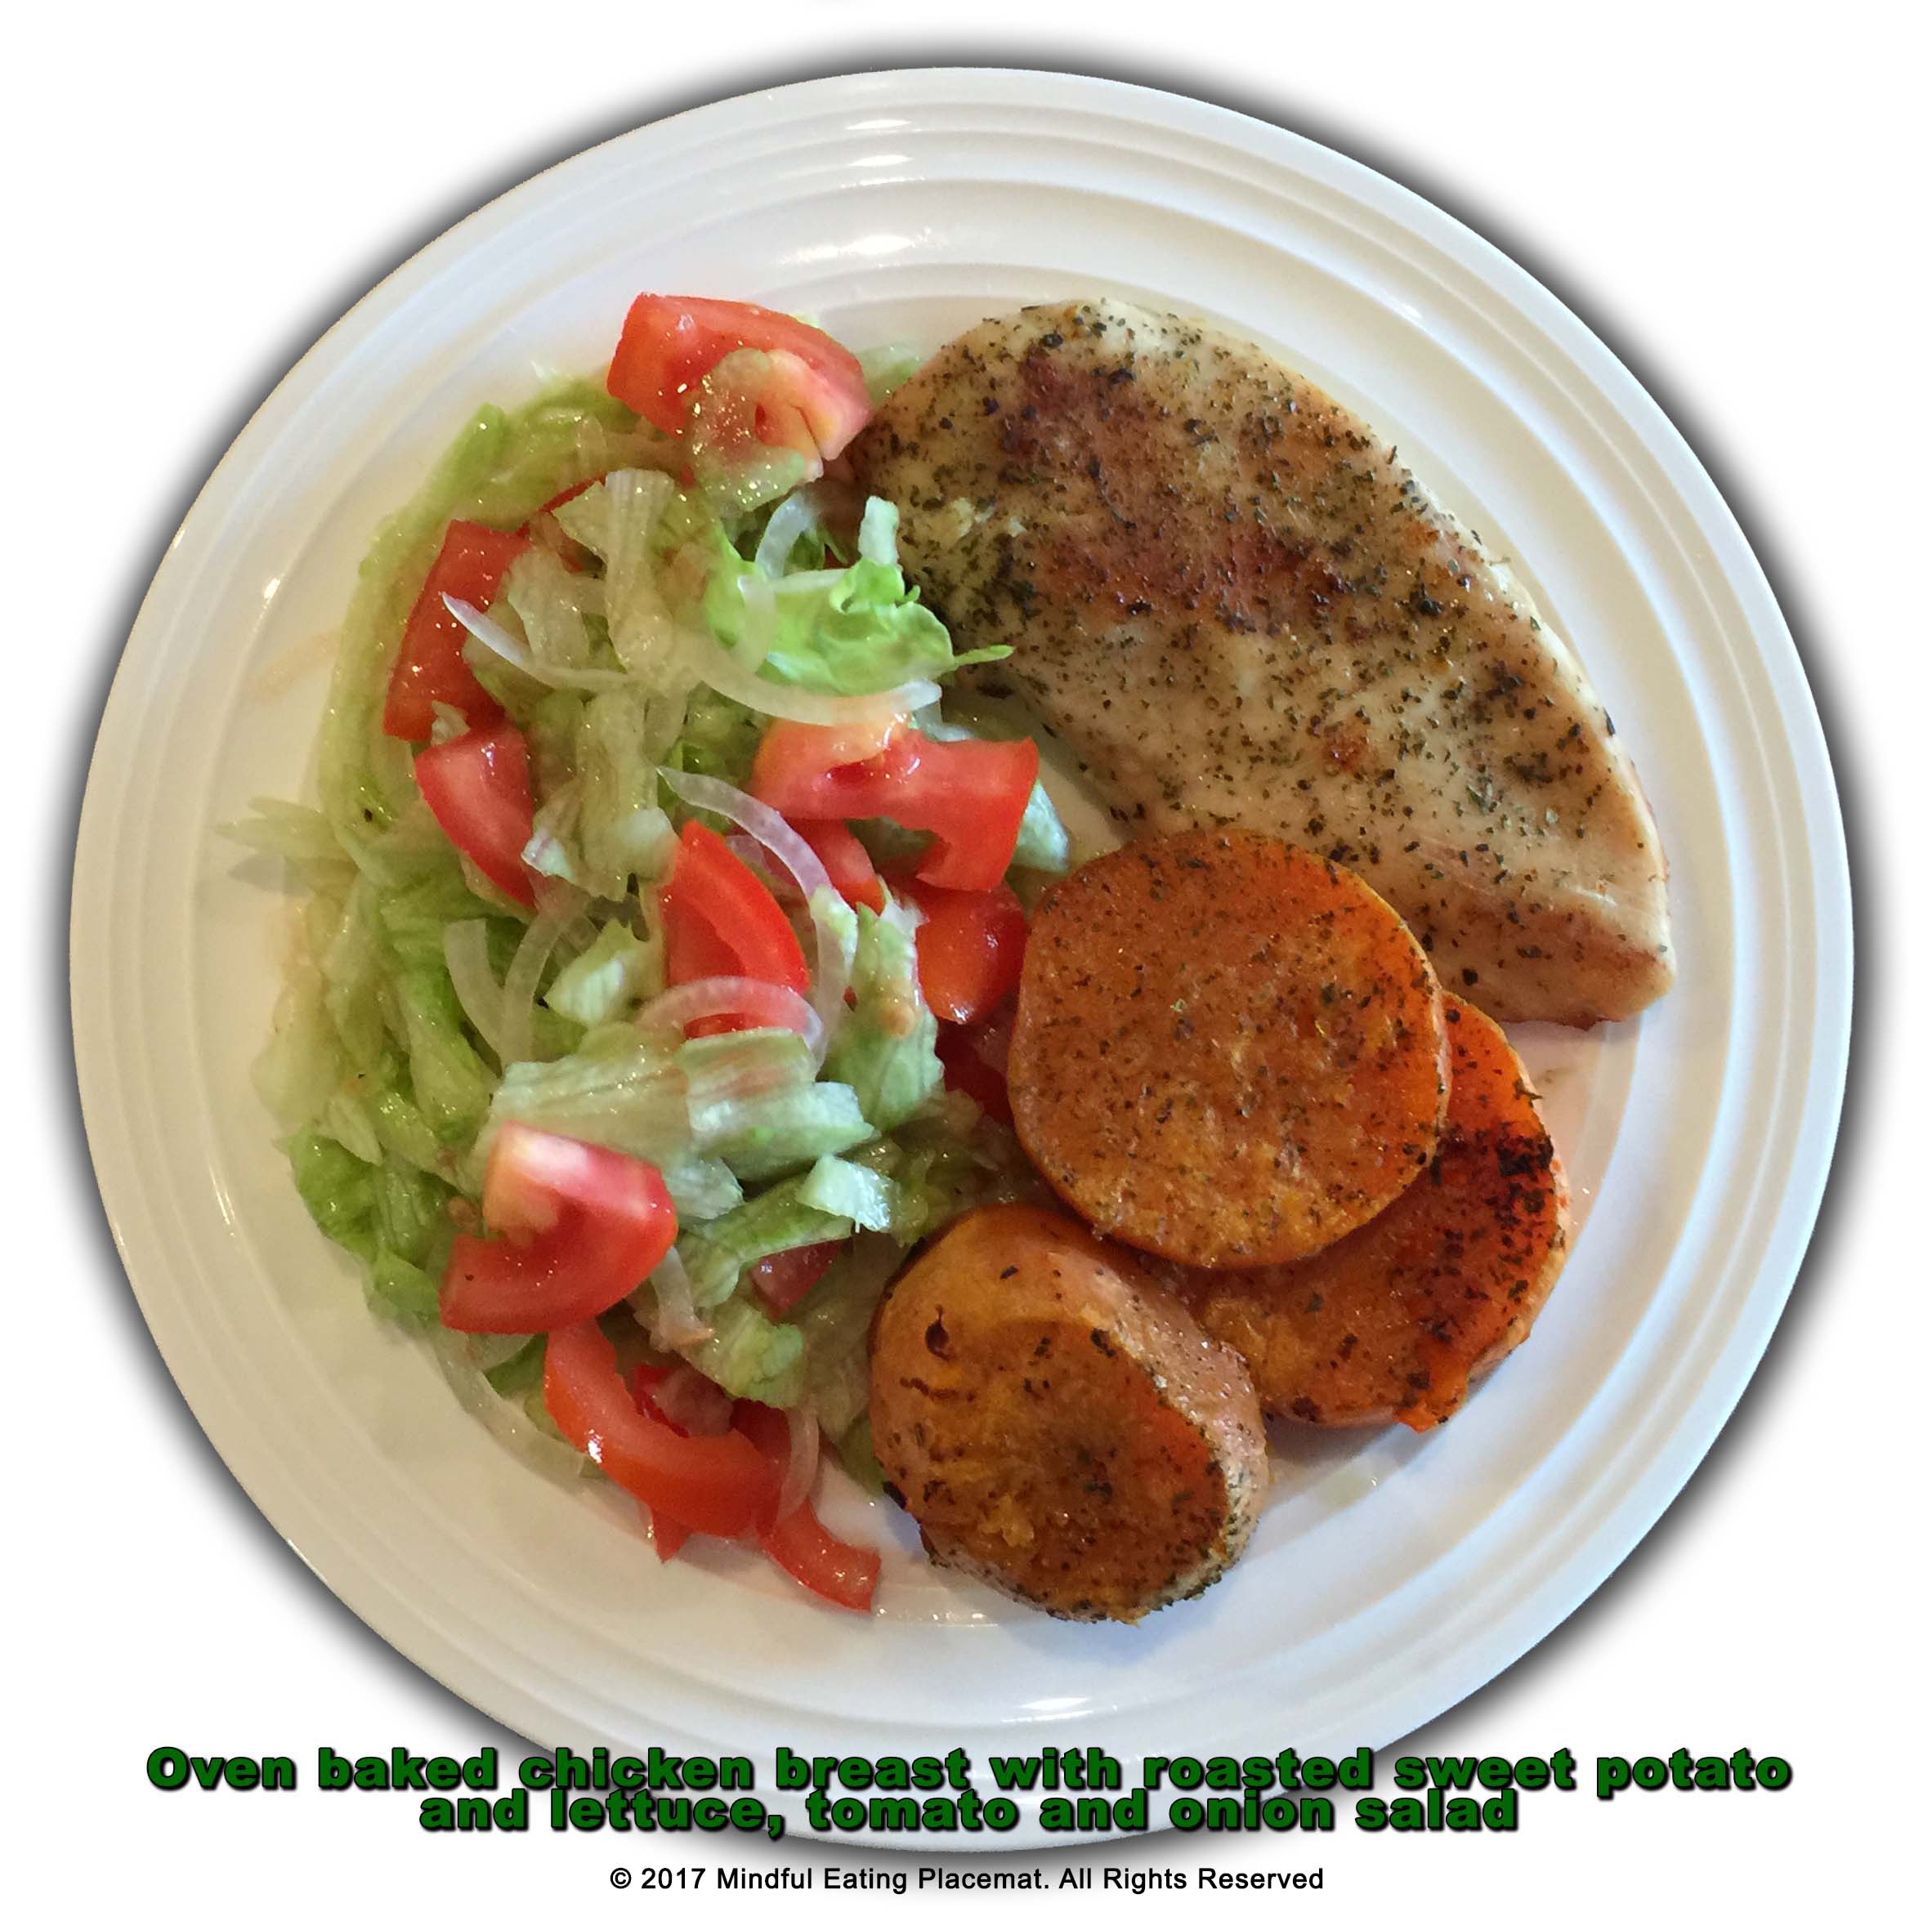 Lean roasted chicken breast with roasted sweet potato and lettuce and tomato salad